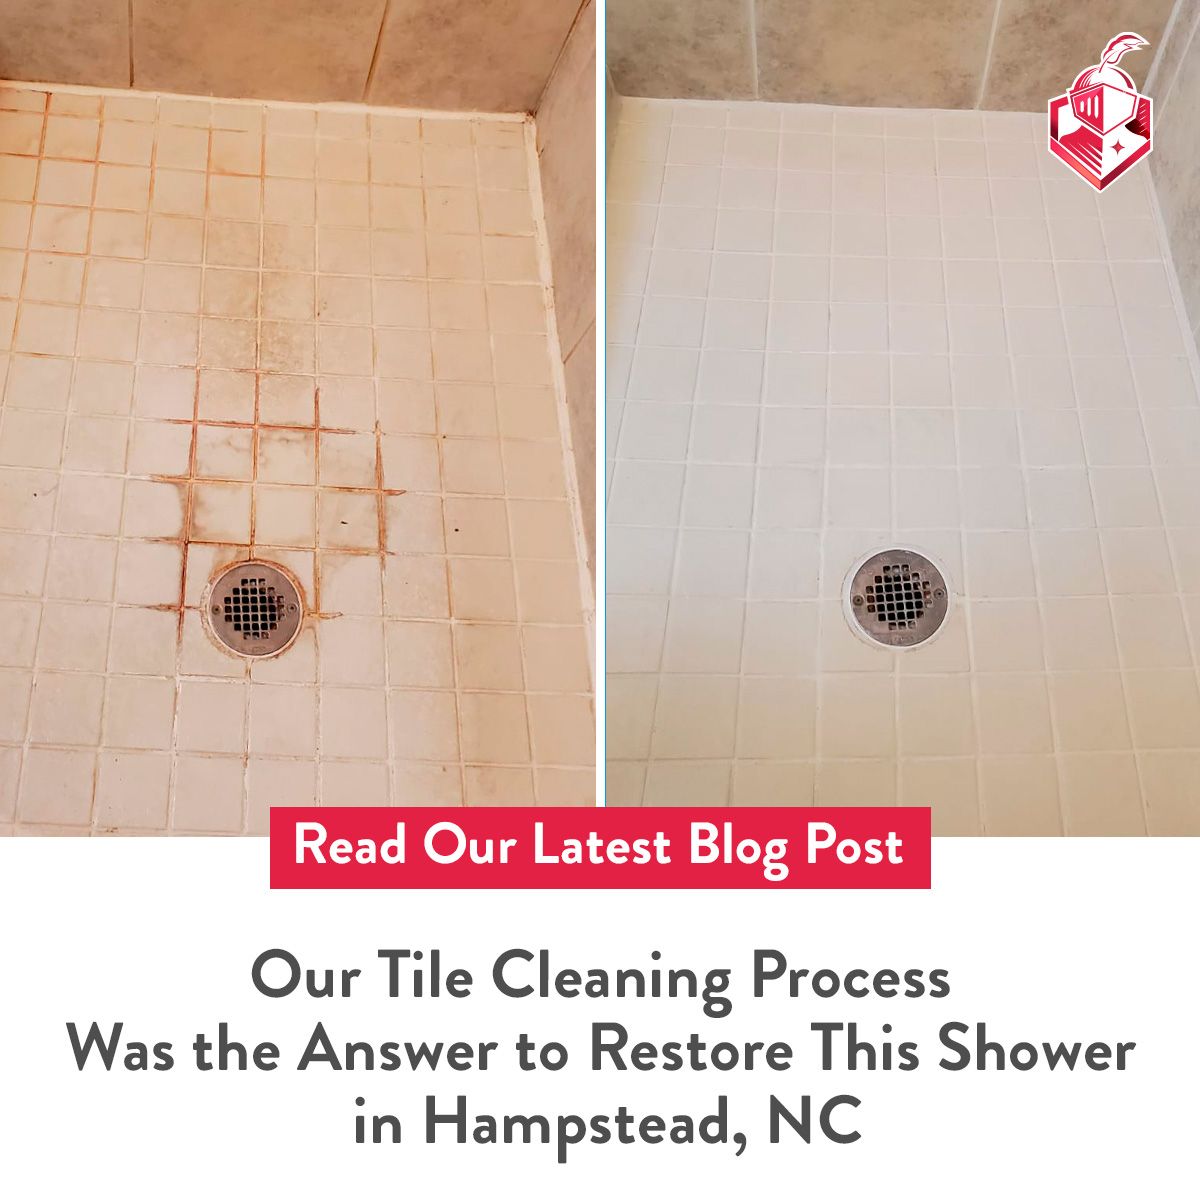 Our tile cleaning process was the answer to restore this shower in Hampstead, NC